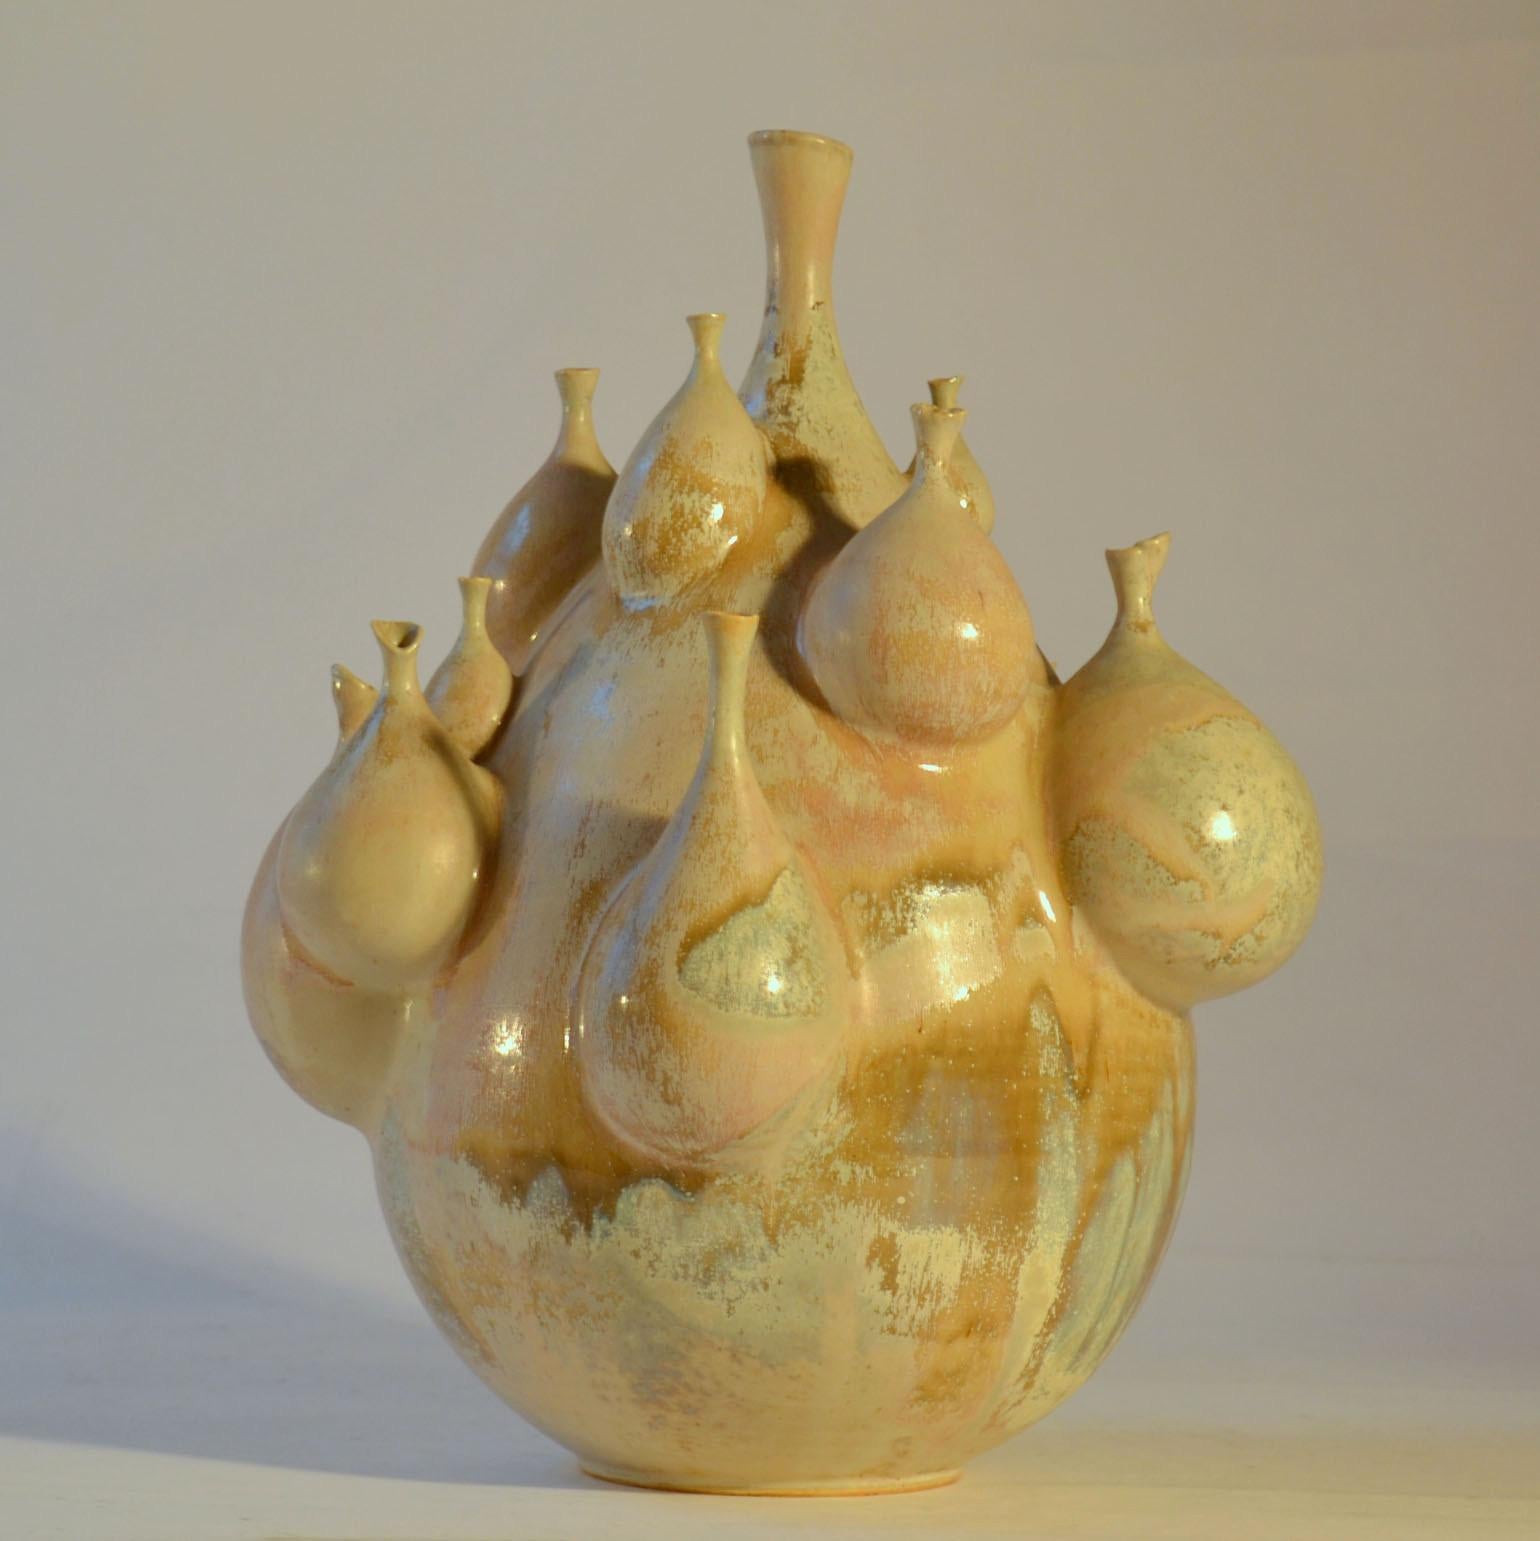 Unique Studio Pottery vase with many small vases attached to the main body is sculpted by M Fisher, Germany. The glaze colors vary from cream to light pink and blue to mustard.